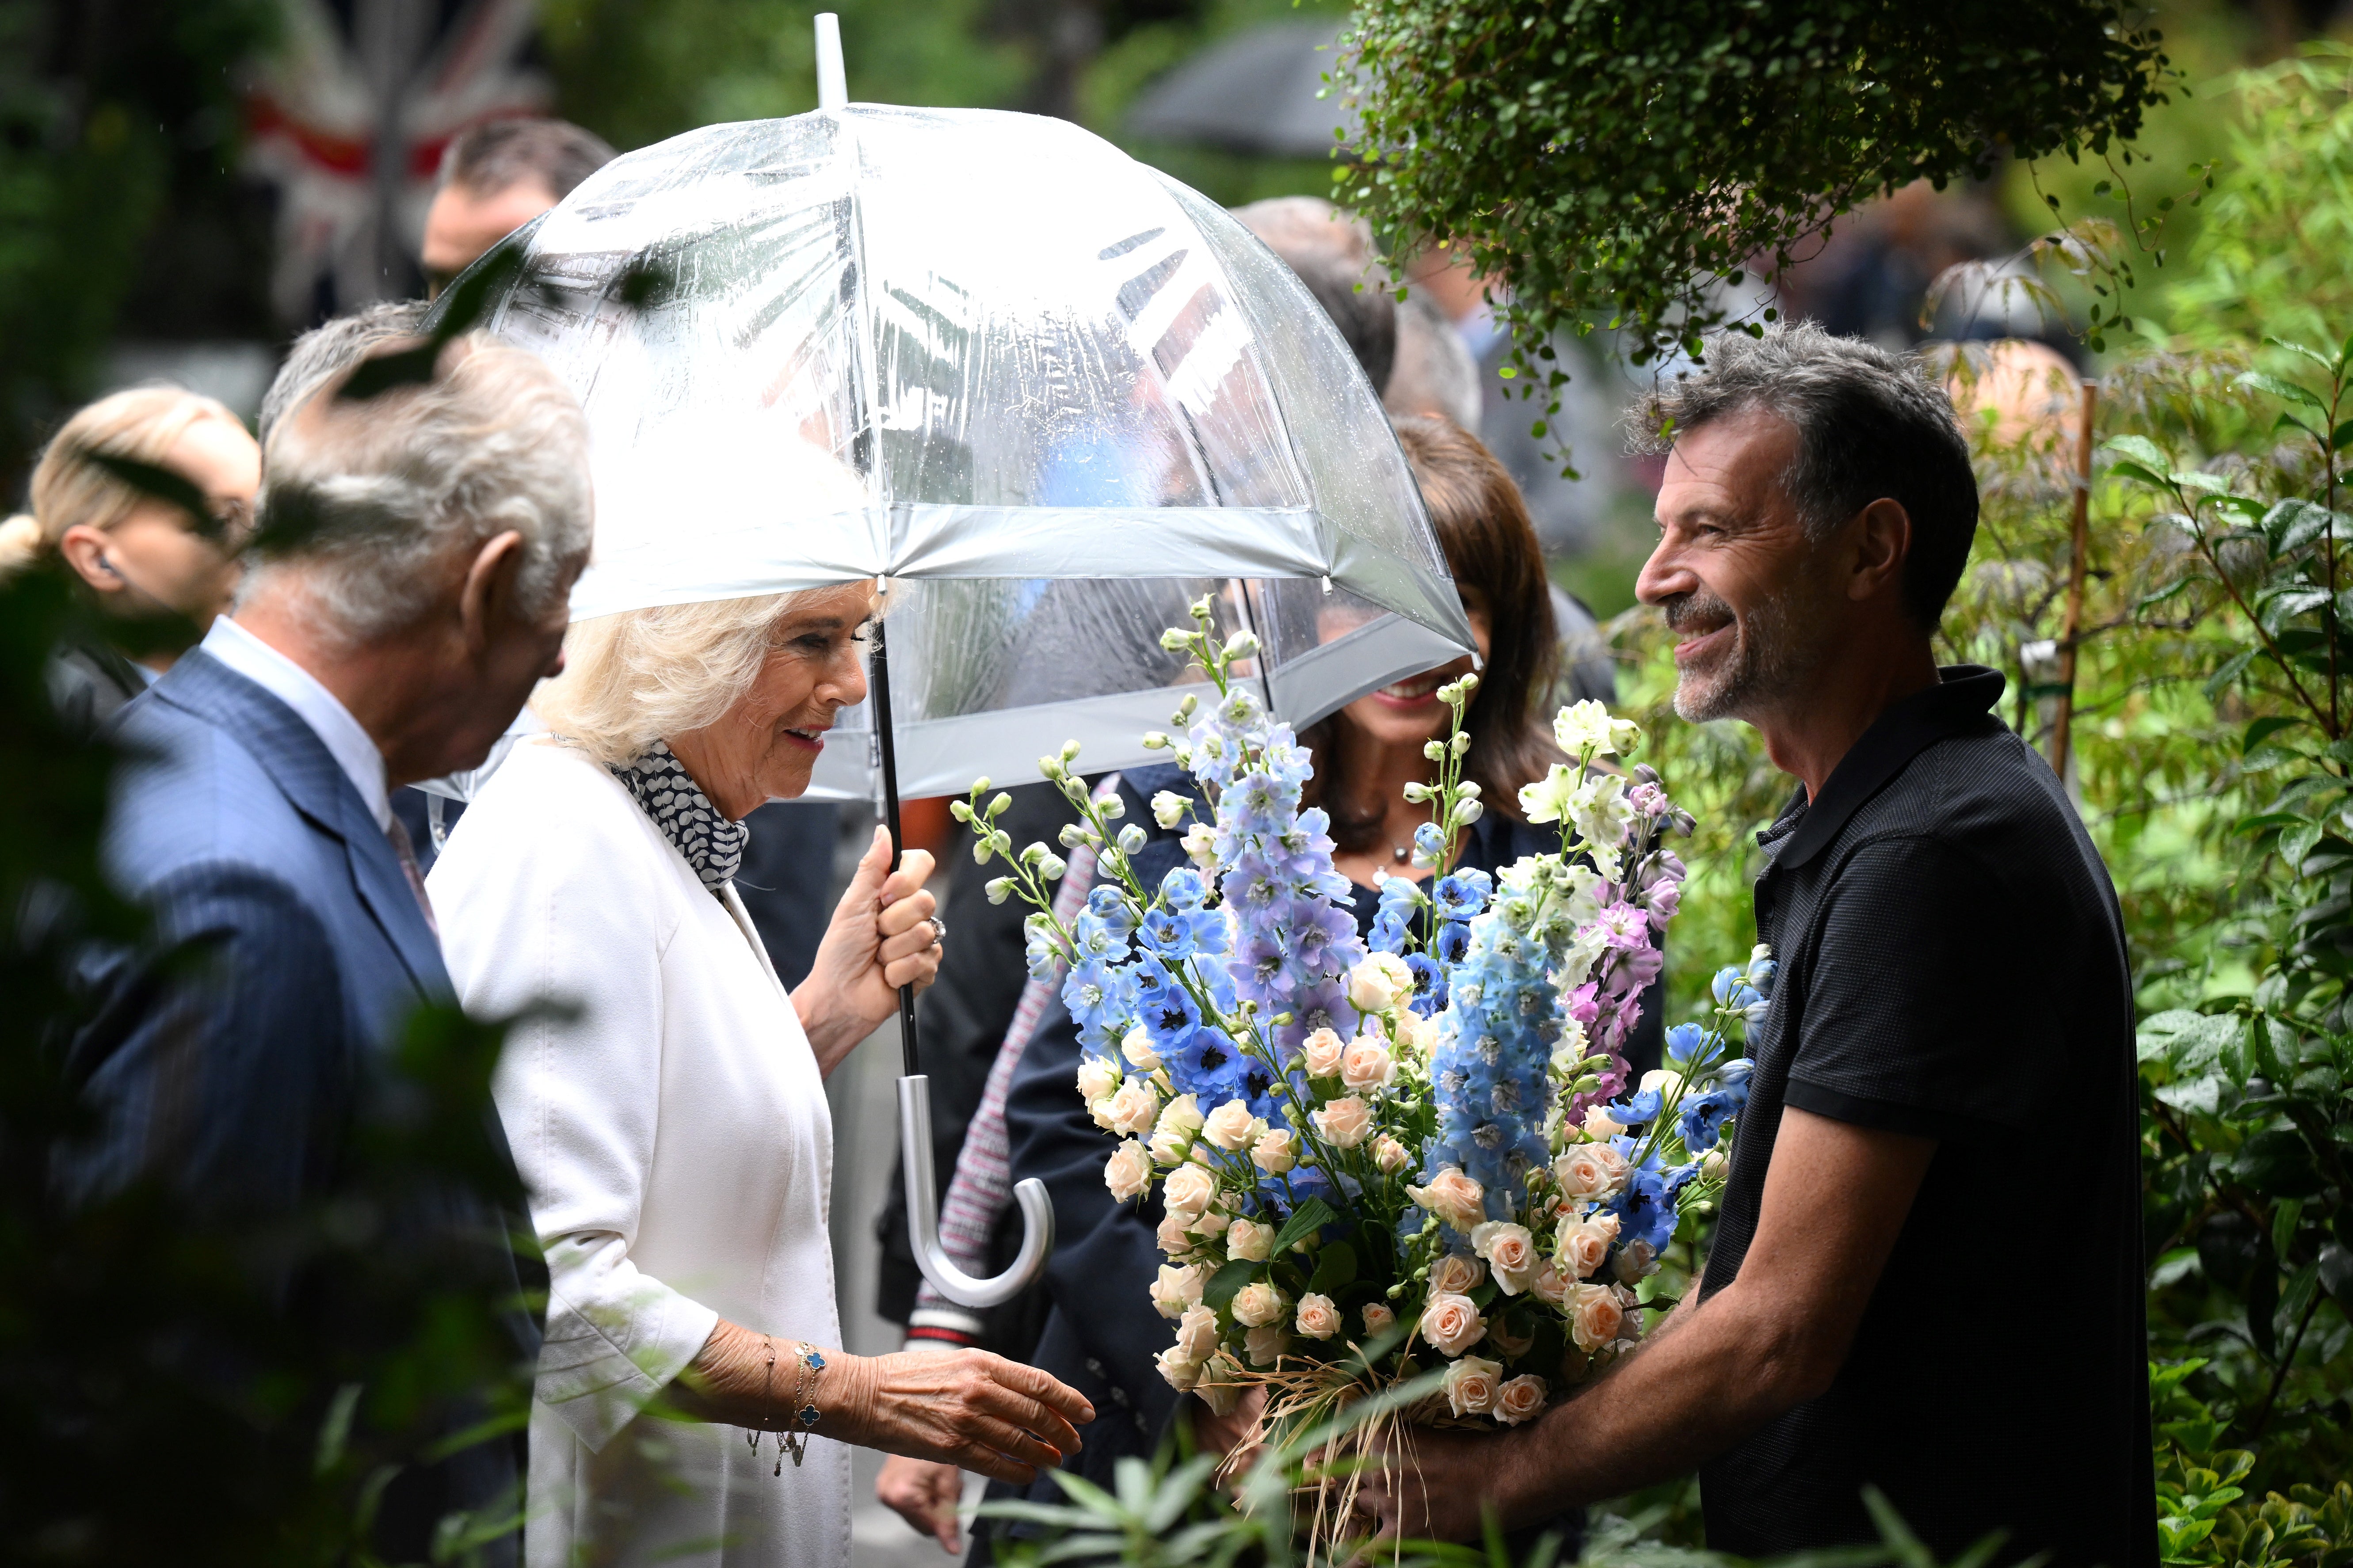 Charles and Camilla receive a gift during a visit to the central Paris Flower Market on day two of the state visit to France